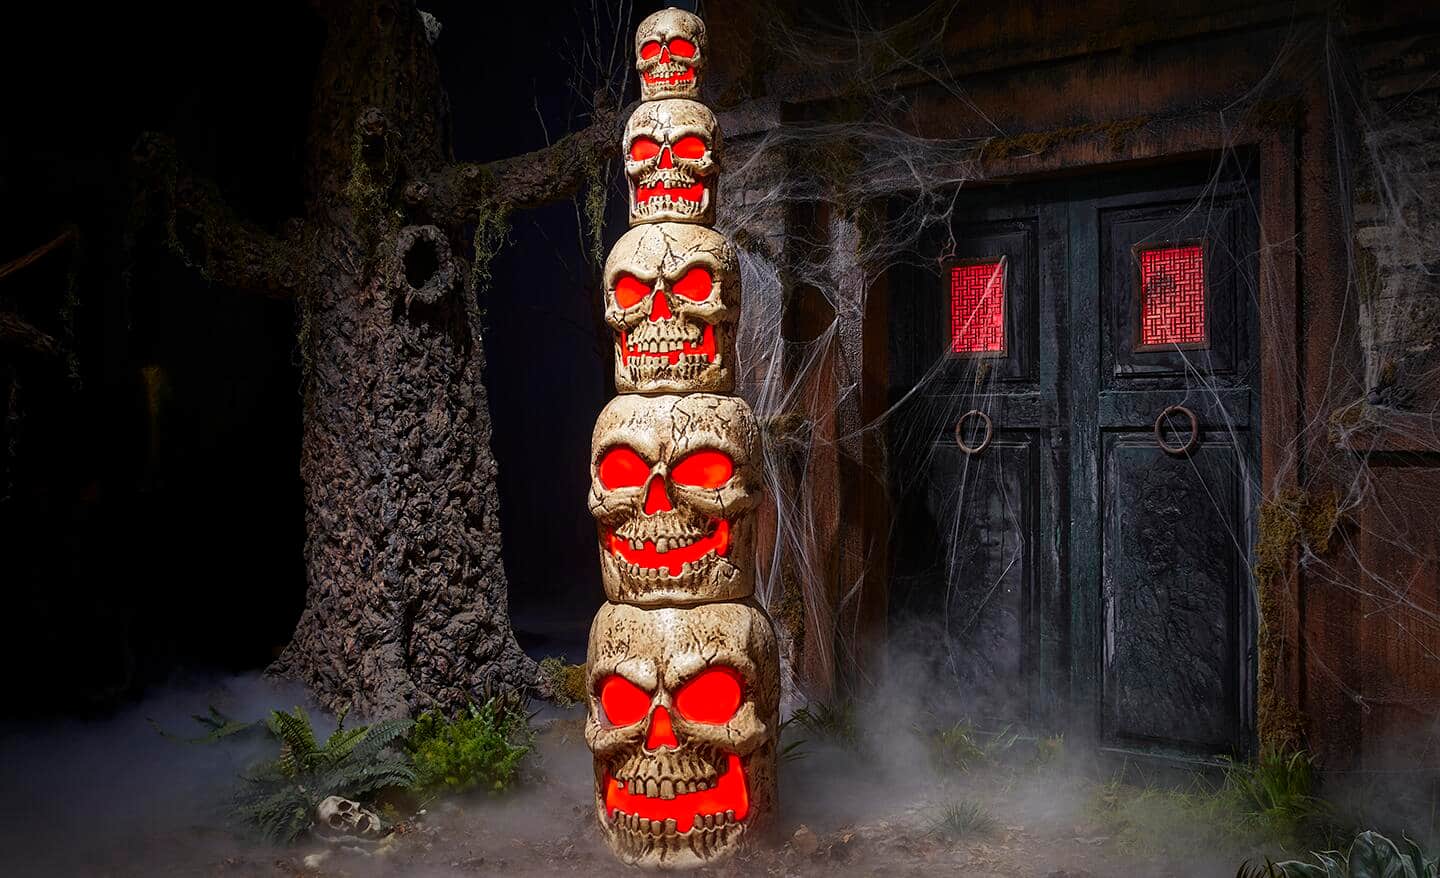 A stack of skulls with glowing red eyes and mouths stand in a spooky scene.